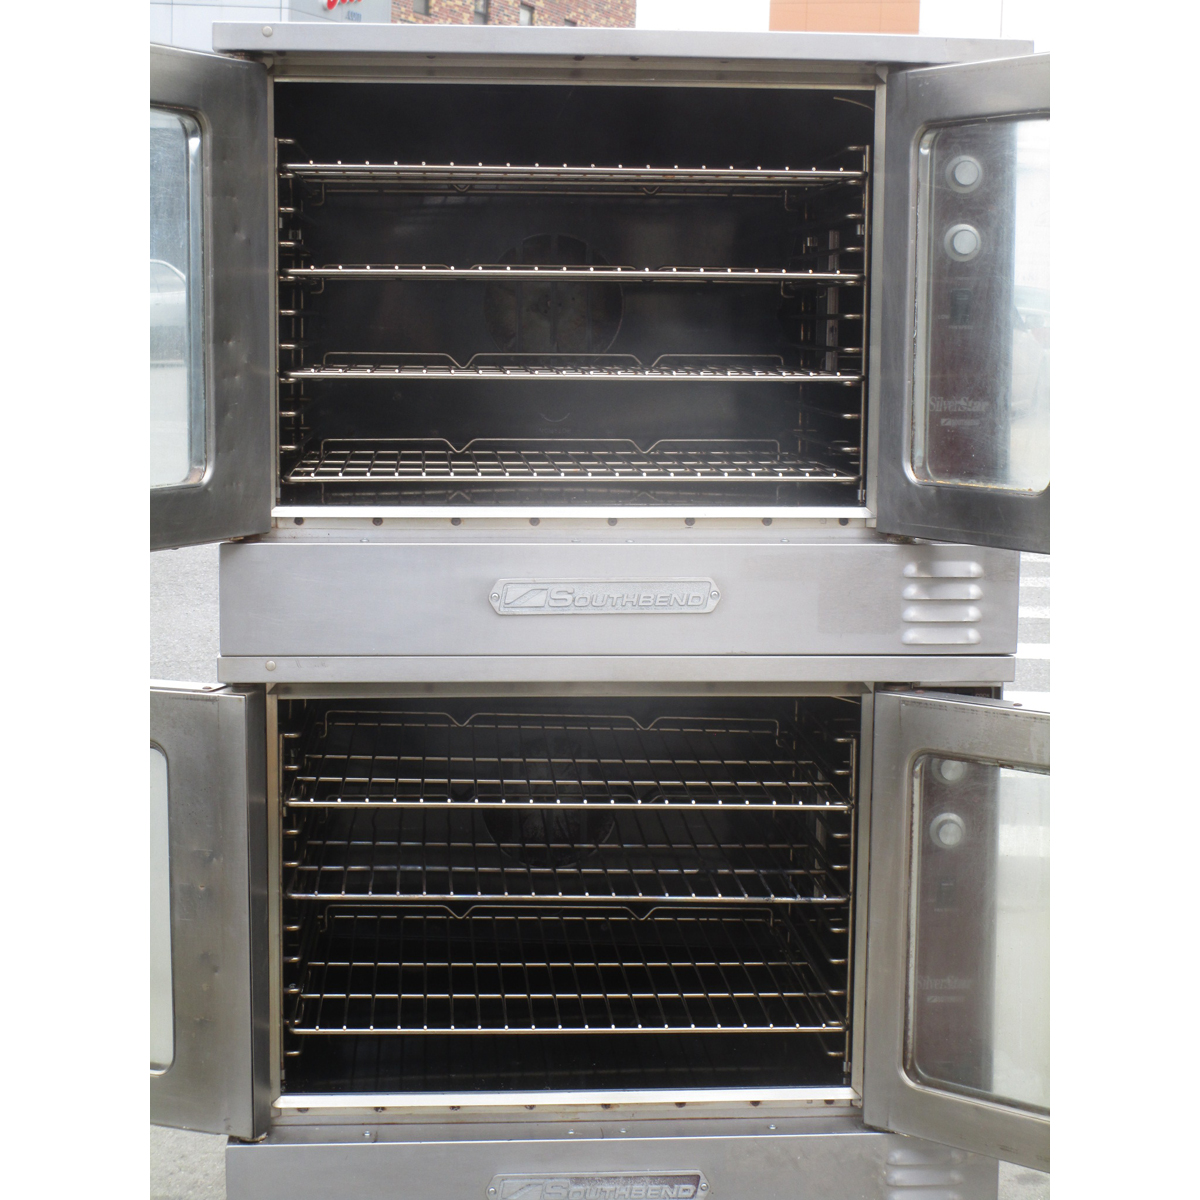 Southbend SLGS/22SC Gas Convection Oven, Used Great Condition image 2